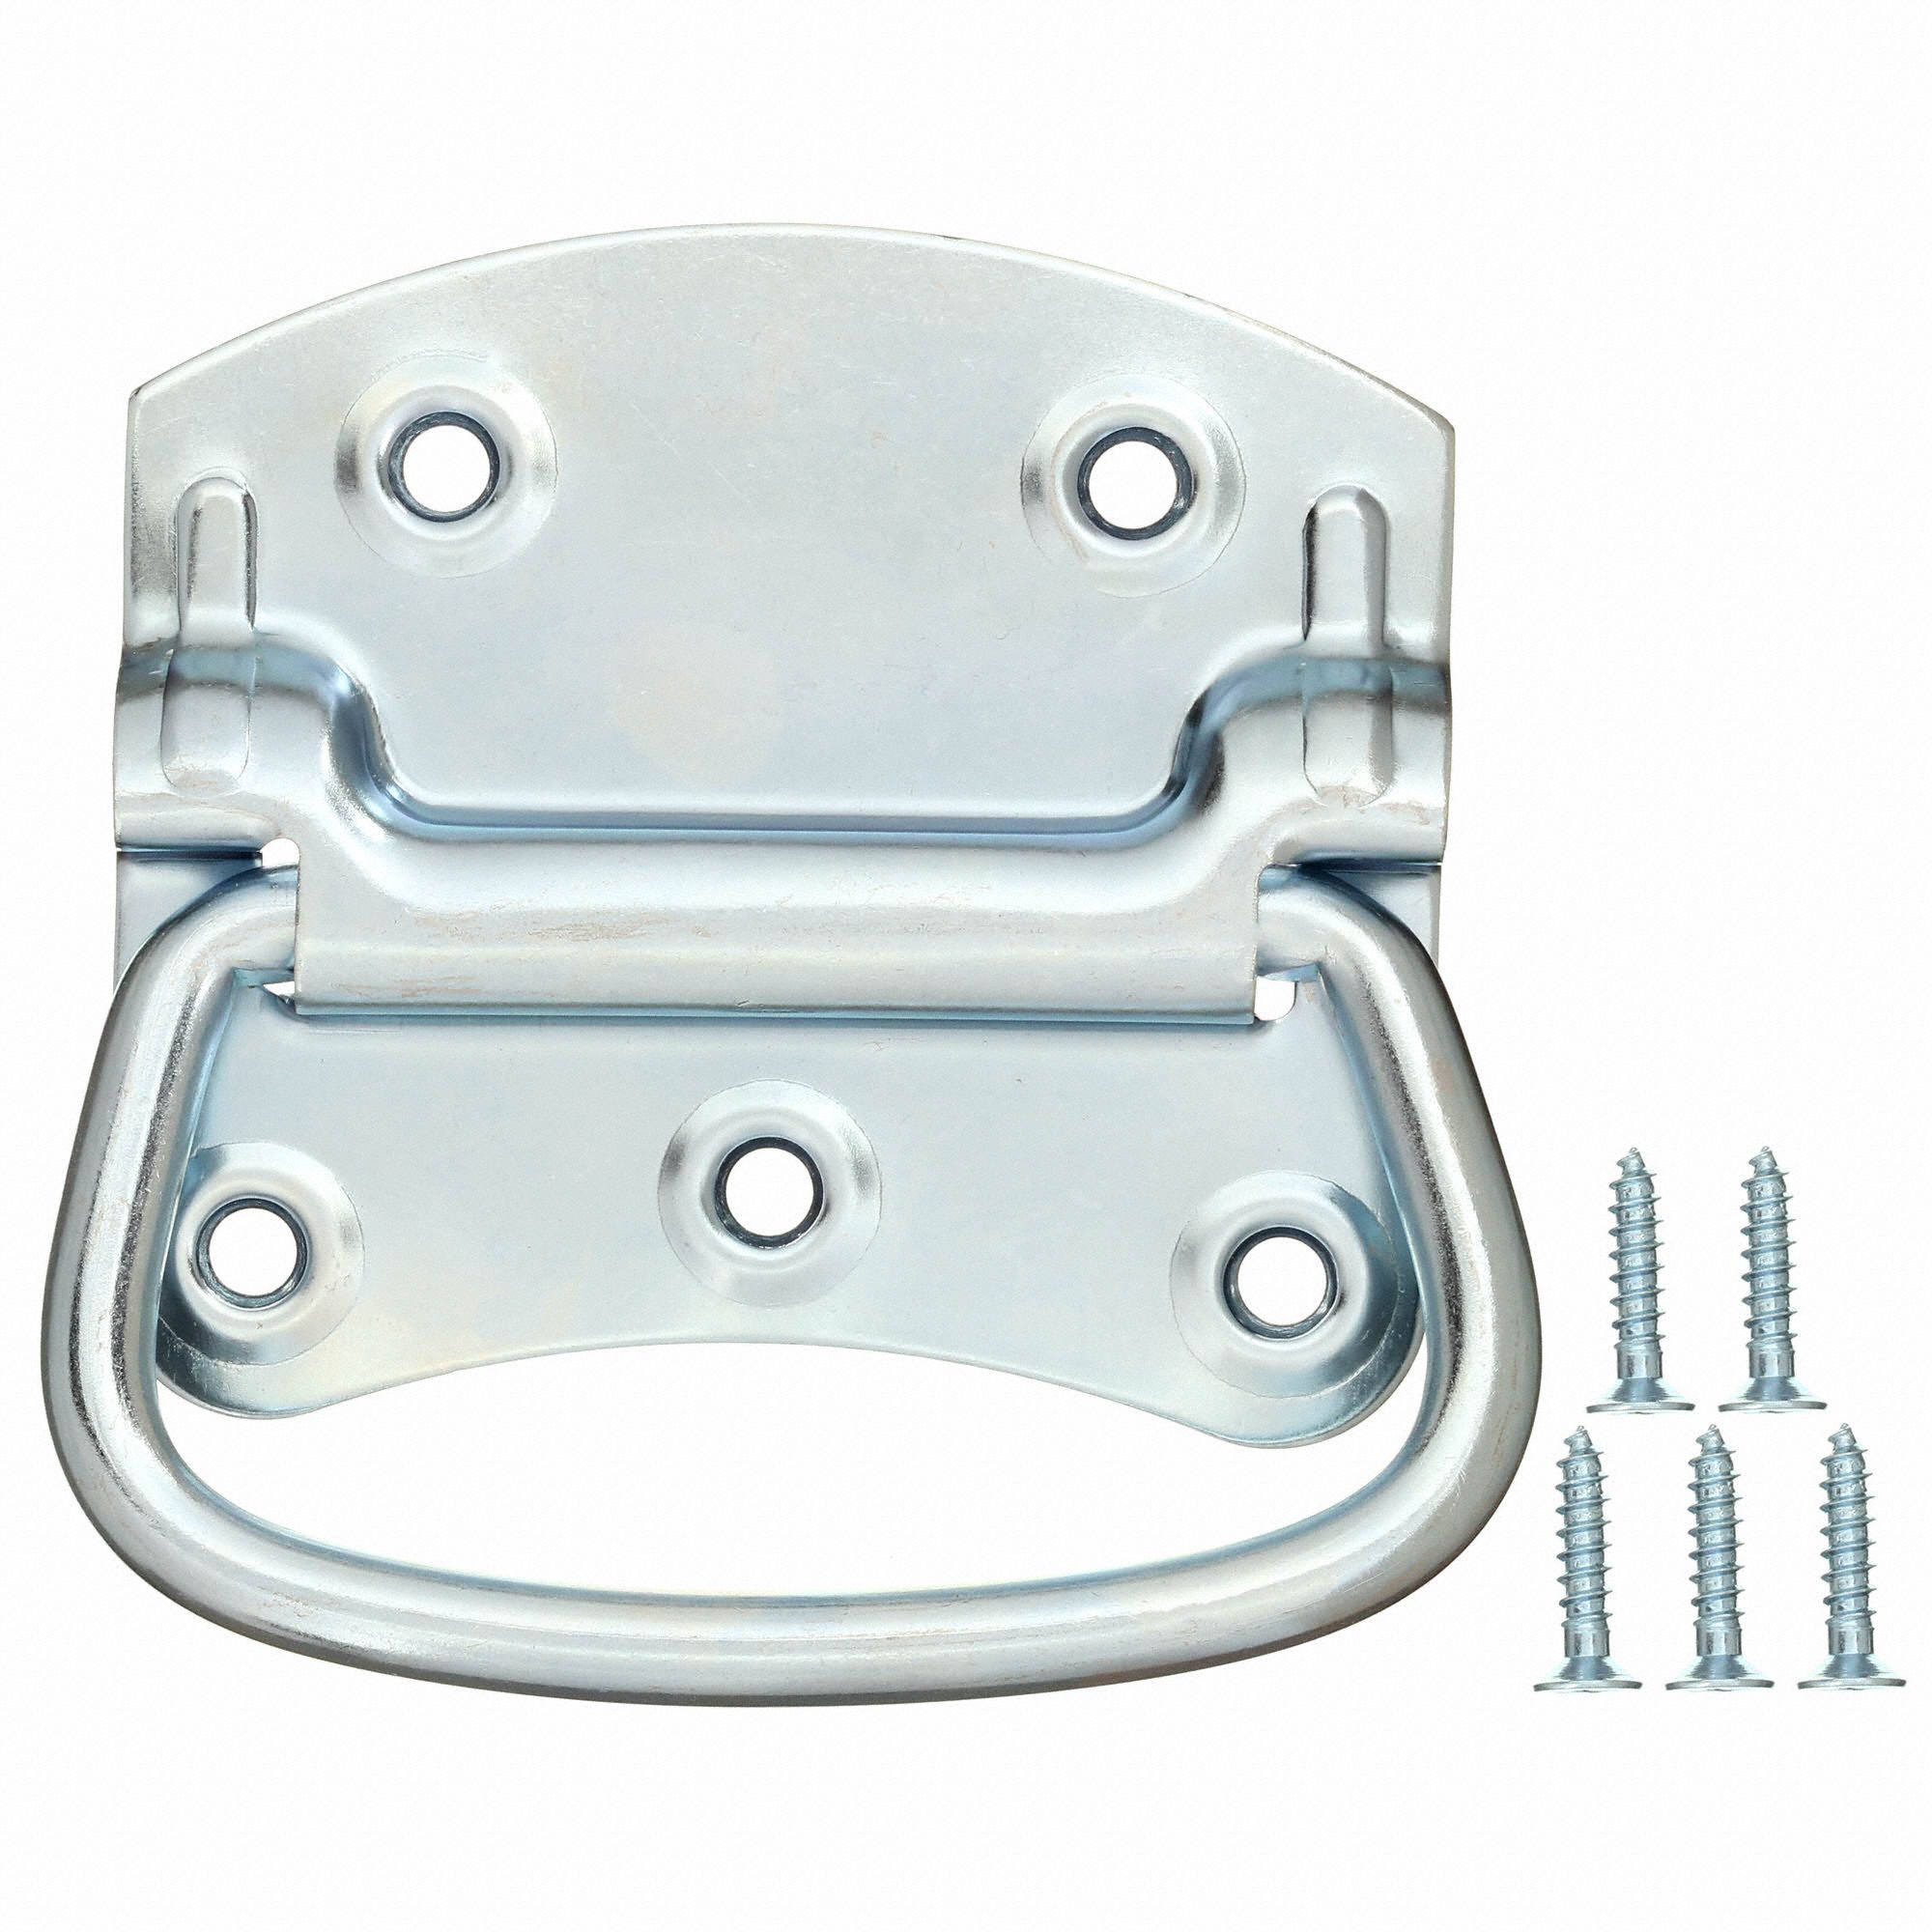 Natural Monroe Pmp Recessed Pull Handle Unthreaded Through Holes PH-0322-1 Each 304 Stainless Steel 